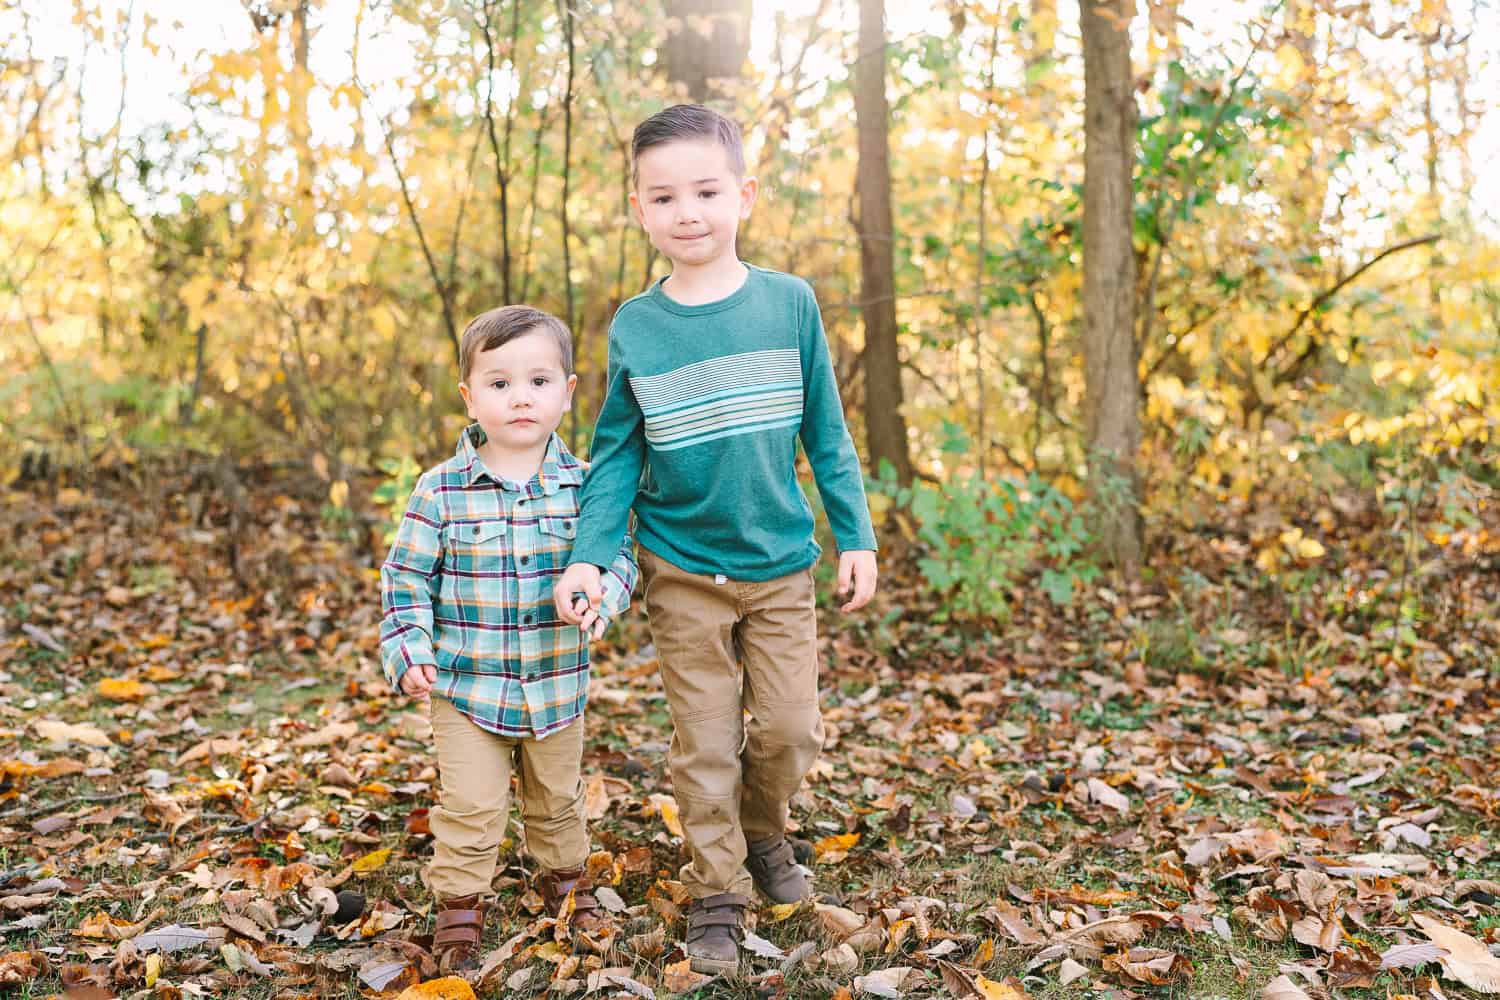 Two young brothers hold hands in the autumn leaves